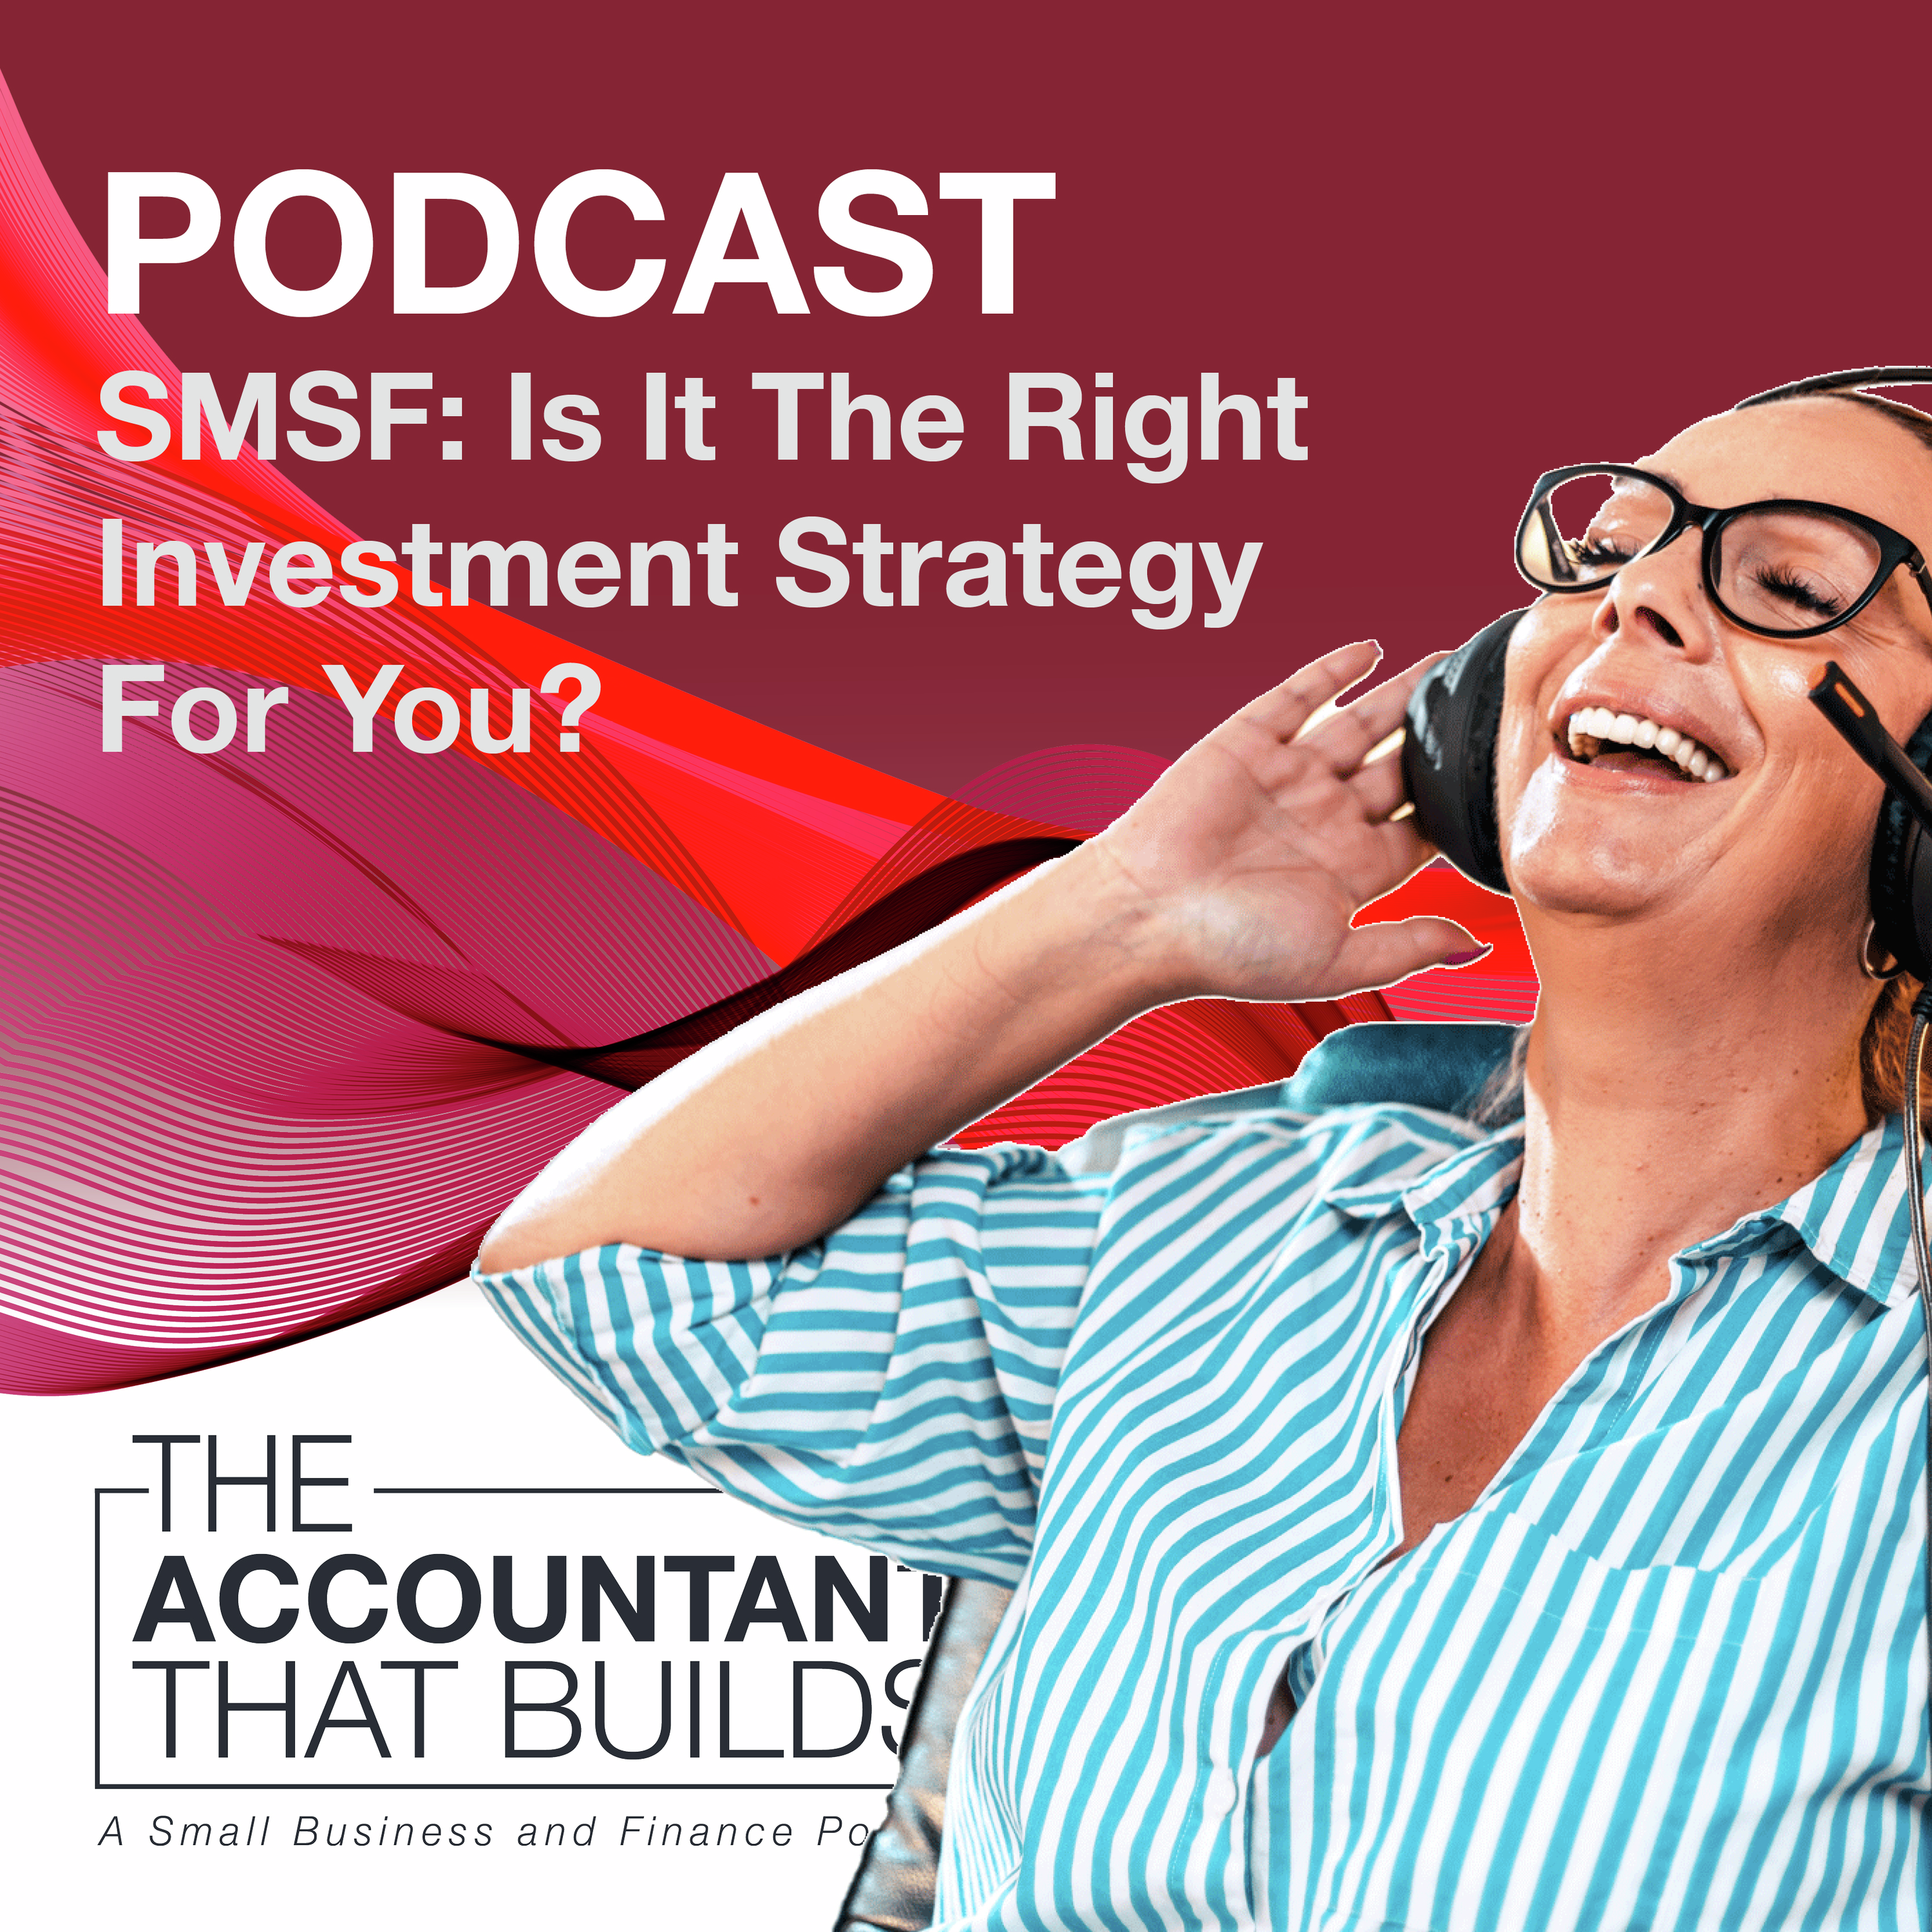 Is SMSF The Right Investment Strategy For You?